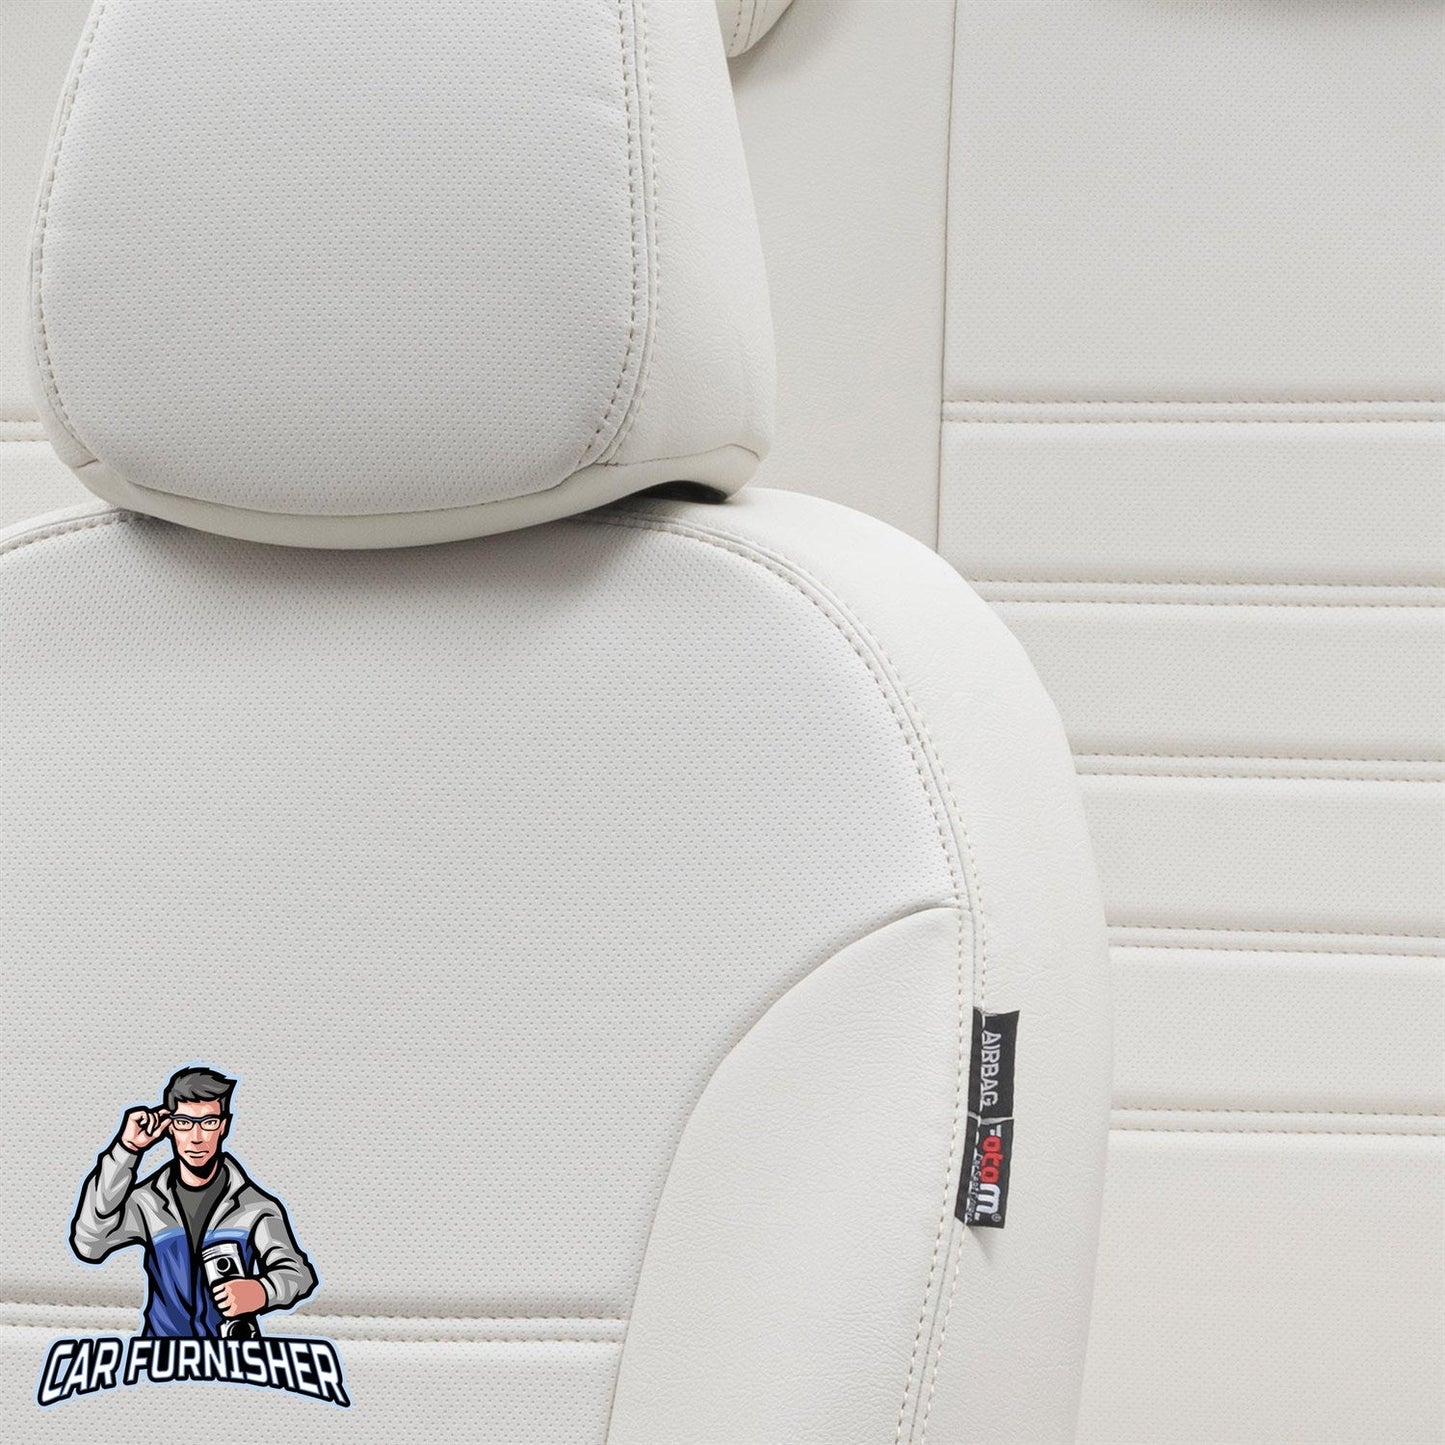 Mazda E2200 Seat Covers Istanbul Leather Design Ivory Leather